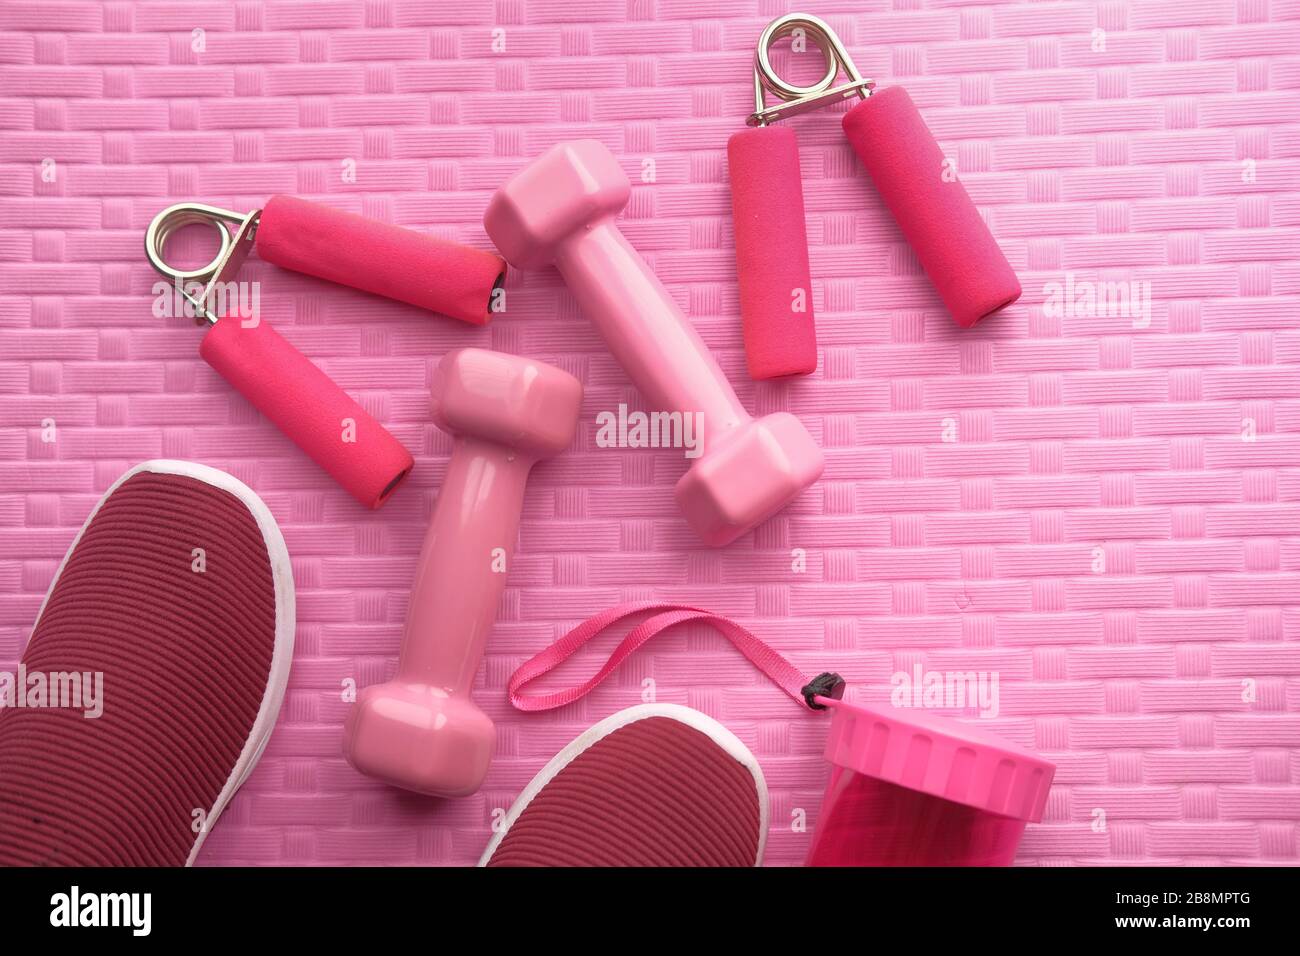 https://c8.alamy.com/comp/2B8MPTG/yoga-mat-with-sport-shoes-and-dumbbells-on-pink-background-2B8MPTG.jpg